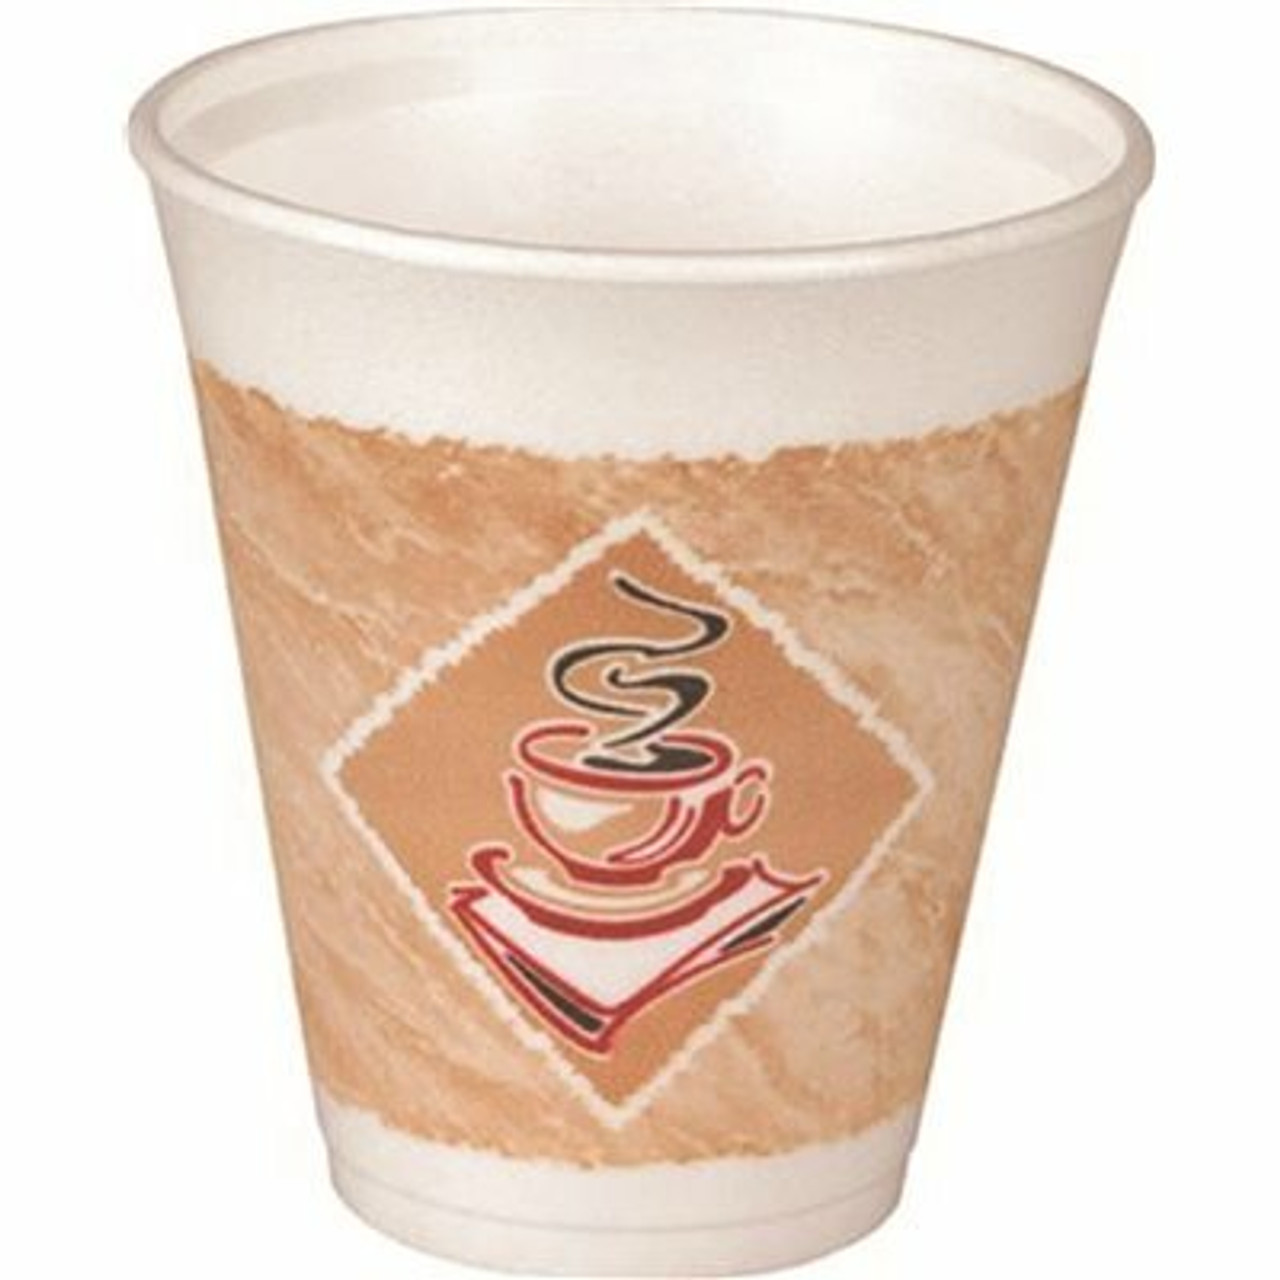 Dart Container Brown And Green 8 Oz. Thermo-Glaze Cafe G Styrofoam Coffee Cups (1,000-Per Case)